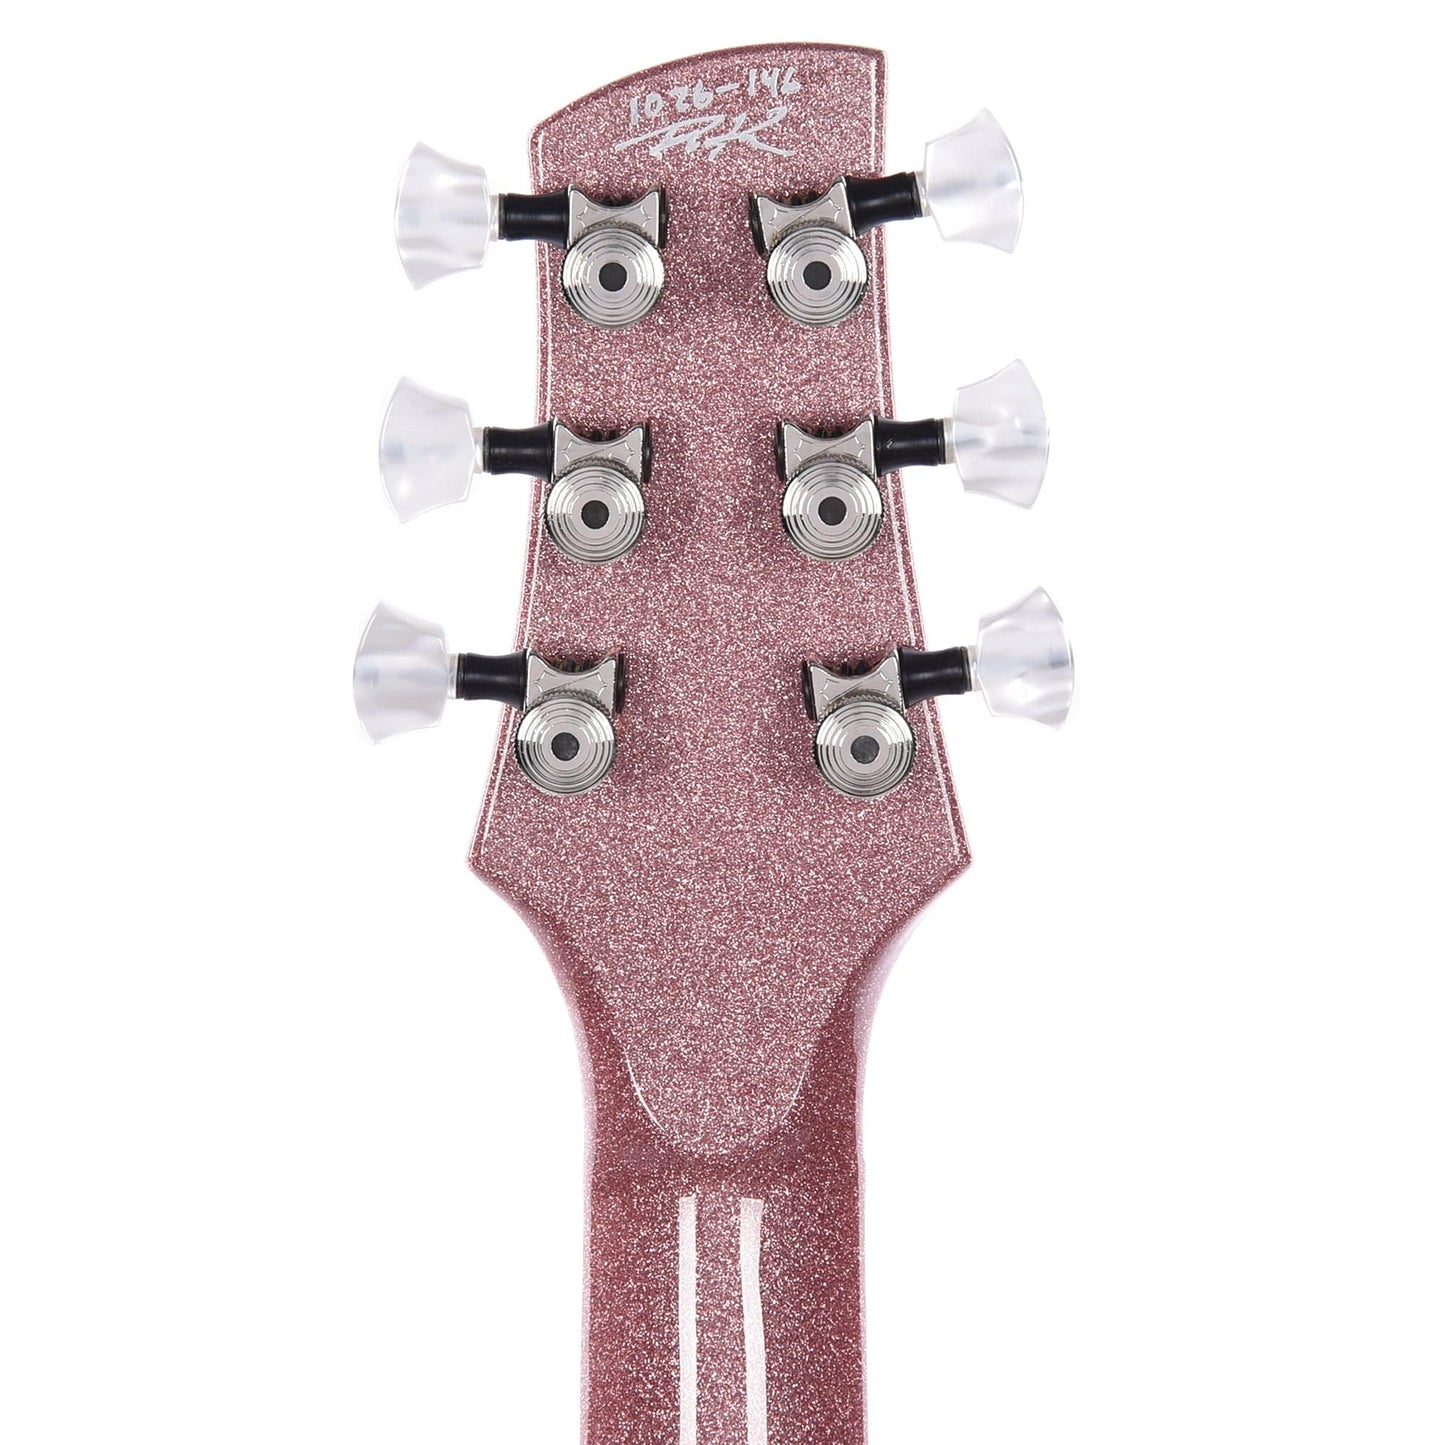 Kauer Starliner Express Brilliant Pink w/Wolfetone KauerBuckers Electric Guitars / Solid Body